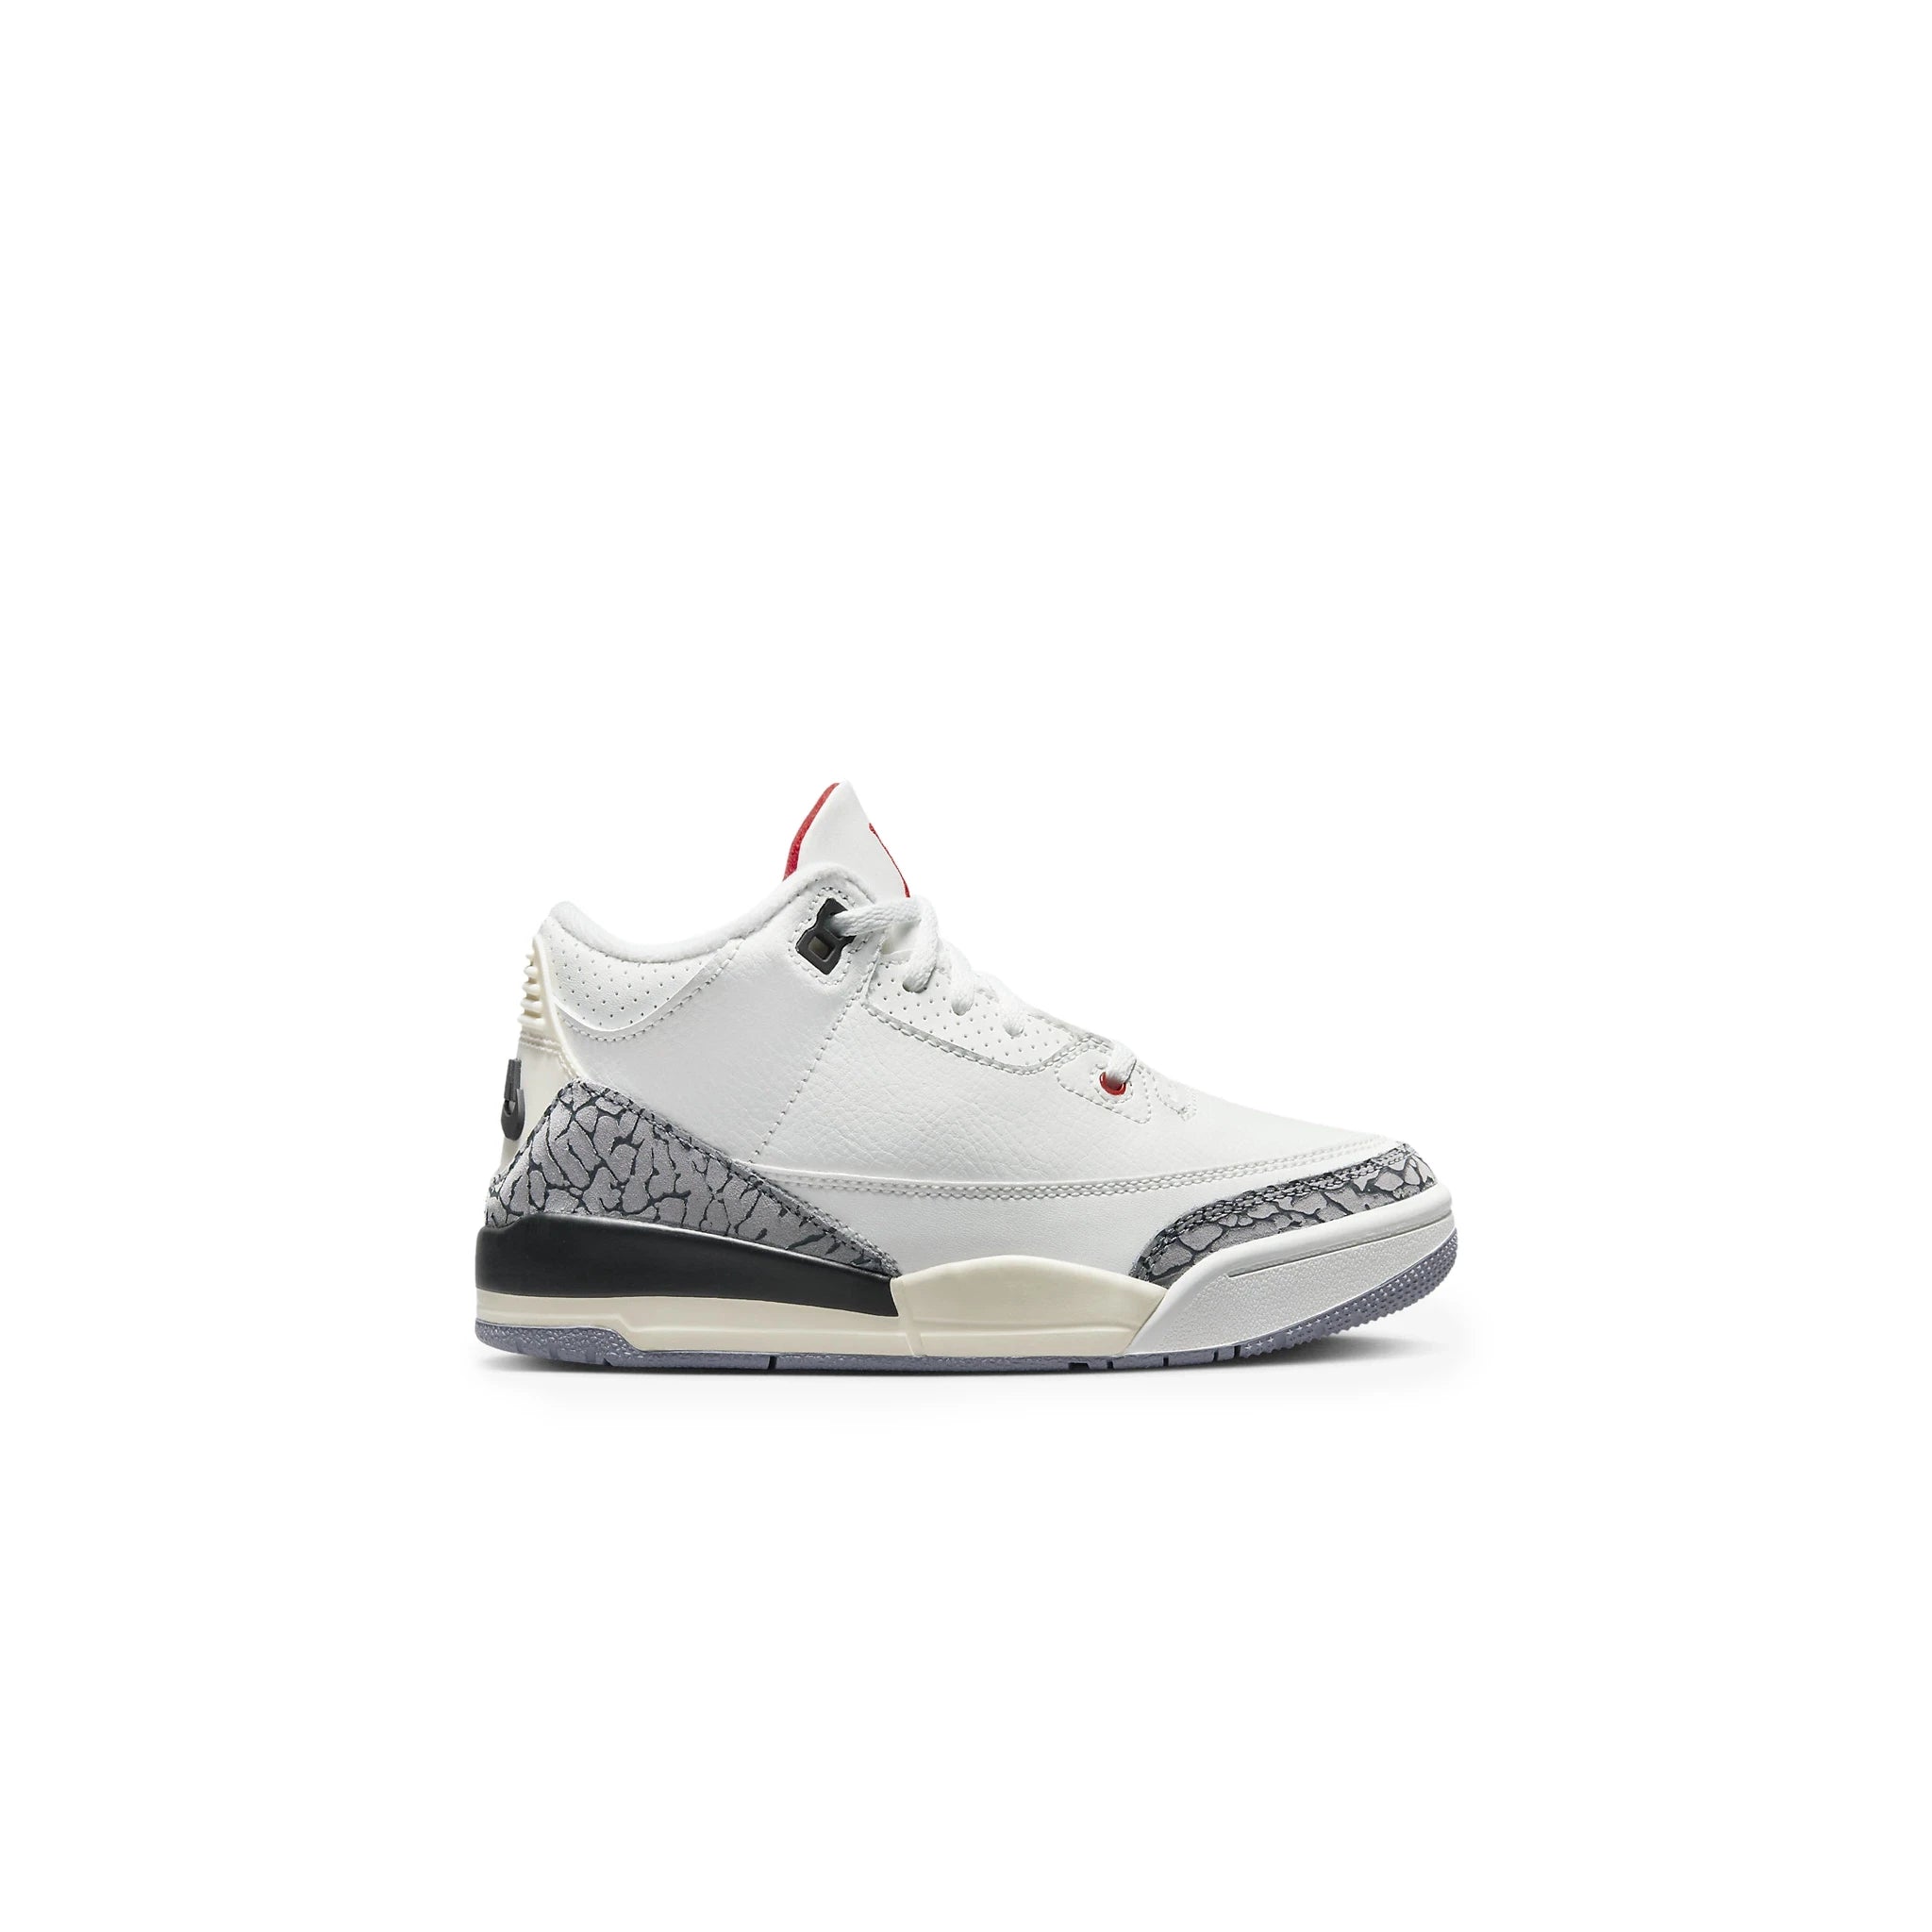 Side view of Air Jordan 3 Retro White Cement Reimagined (PS)